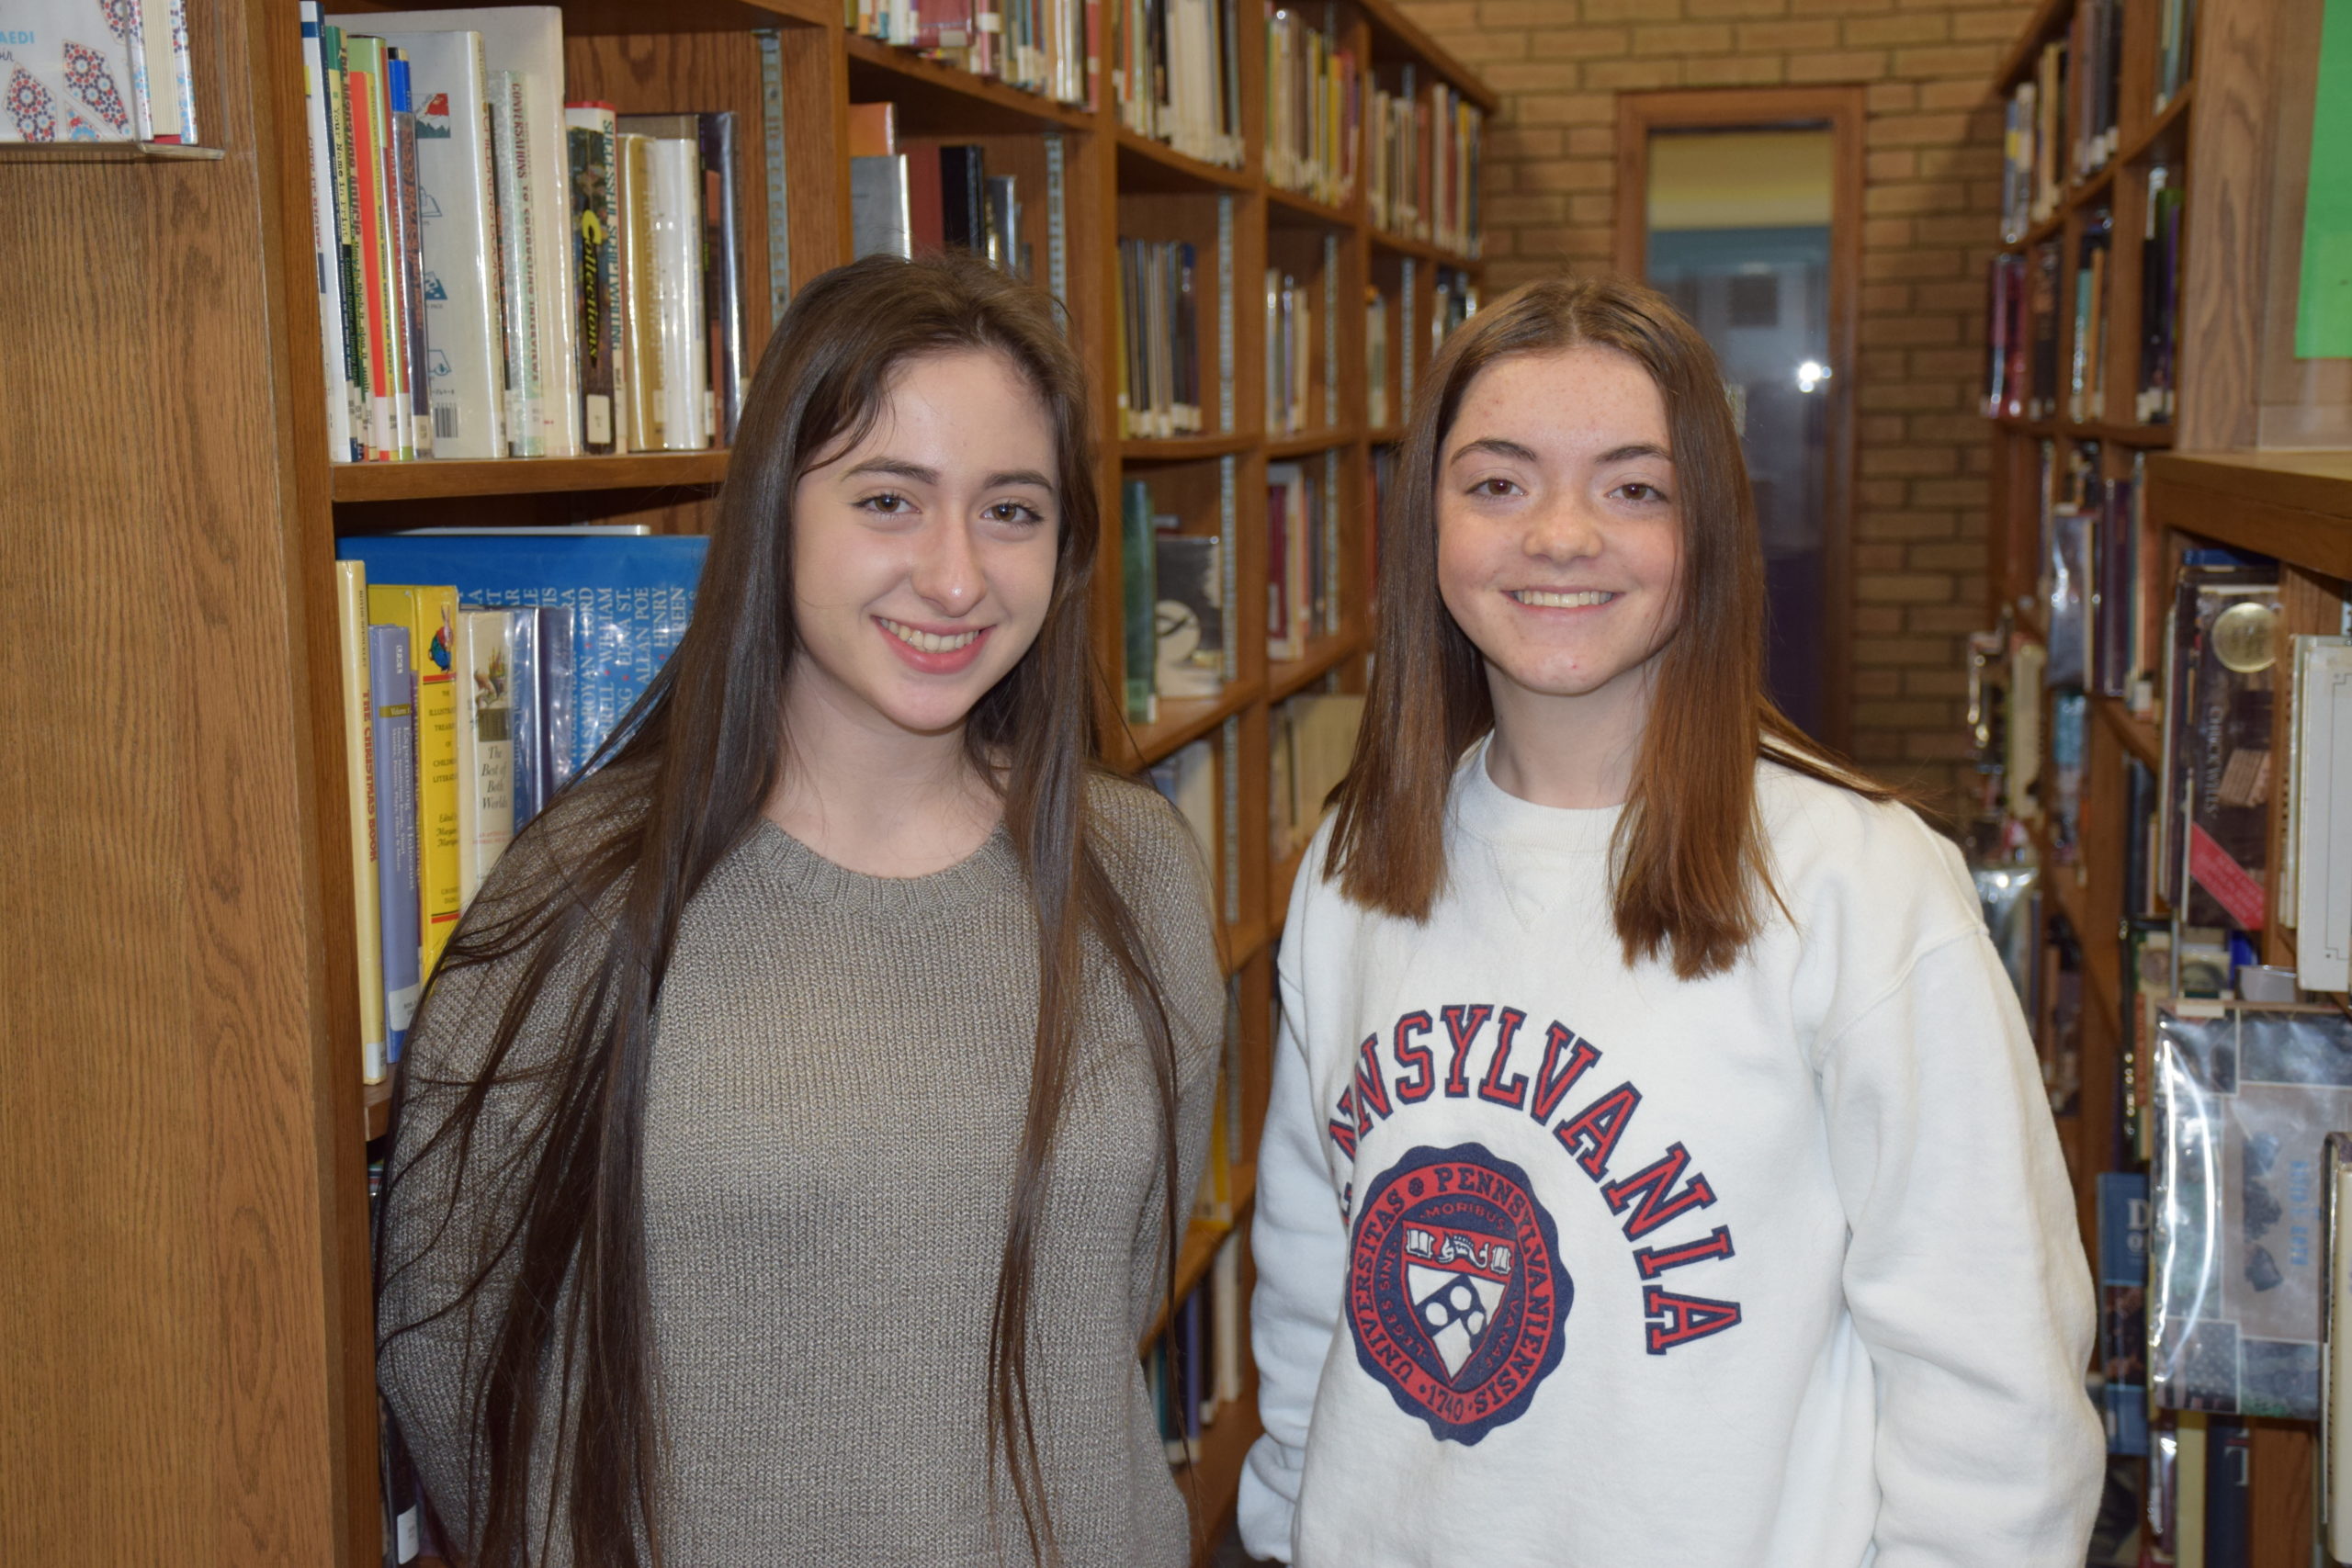 Hampton Bays High School has named Class of 2022 seniors Kristina Georges and Lily Simpson-Heavey as valedictorian and salutatorian, respectively.